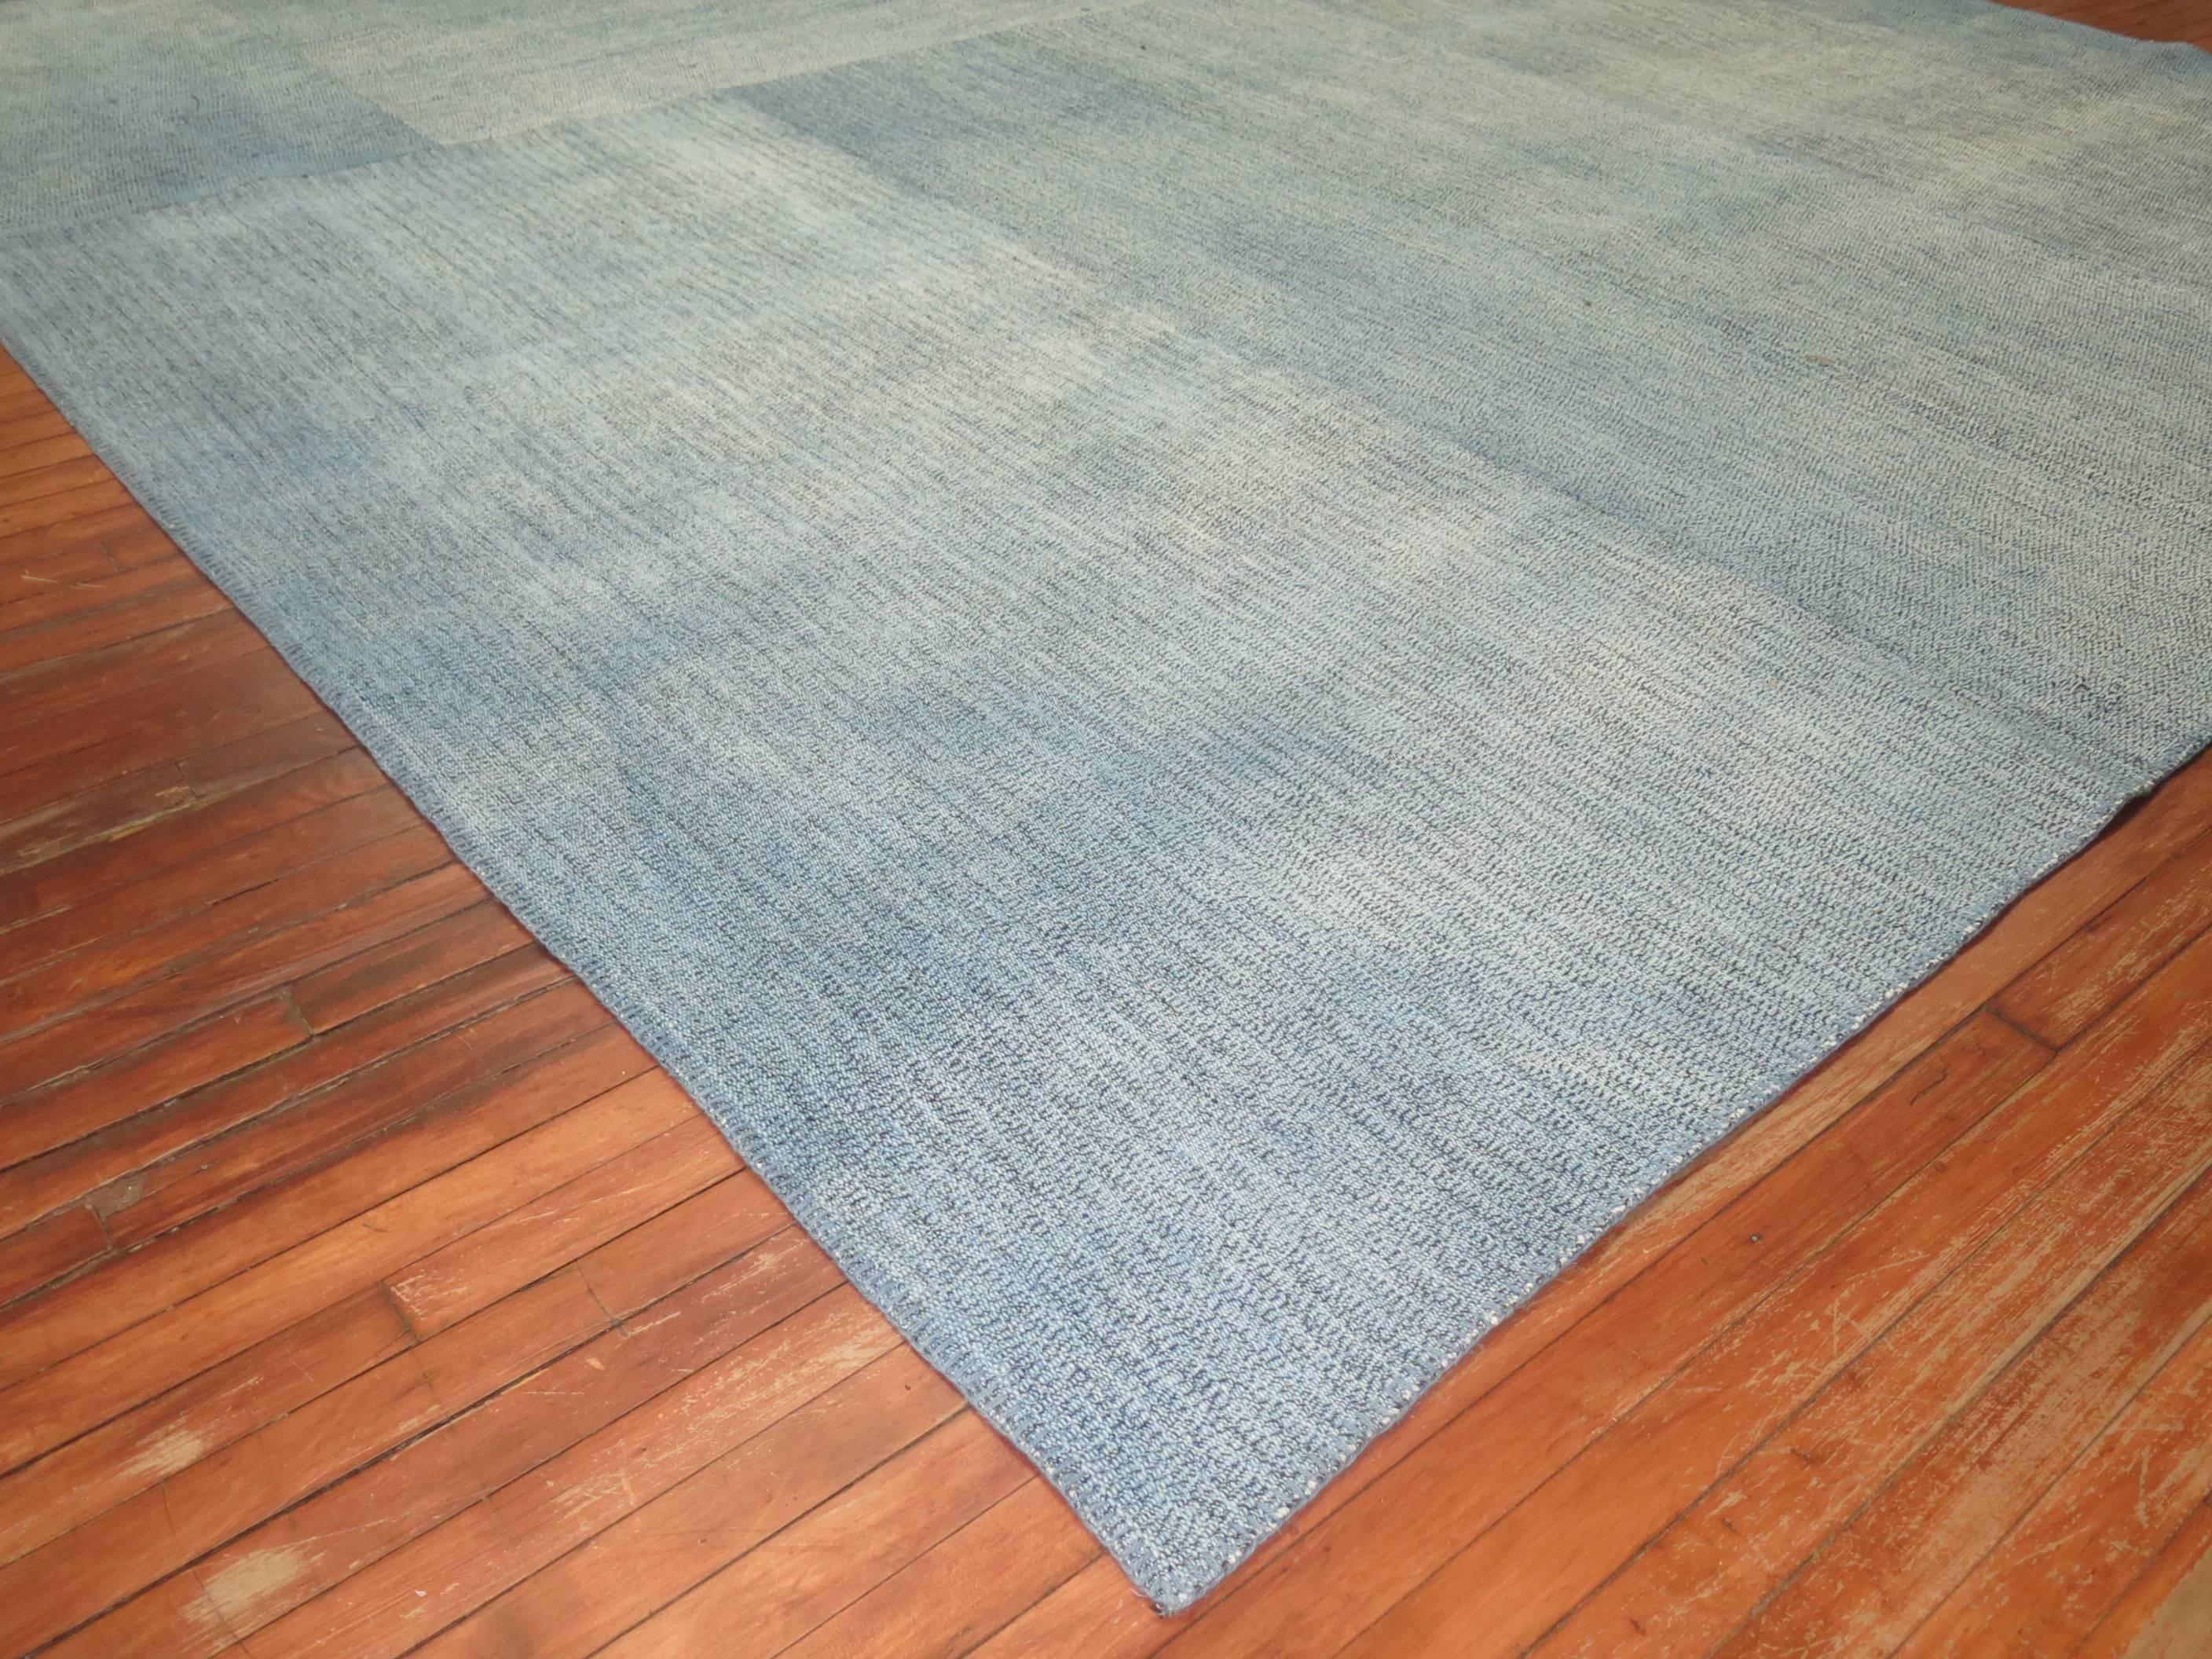 Square size hand-knotted Turkish Kilim in a blotchy aqua blue color. Handwoven by recycled cotton and goat hair material giving it an old world vintage feel.

10'10'' x 10'10''